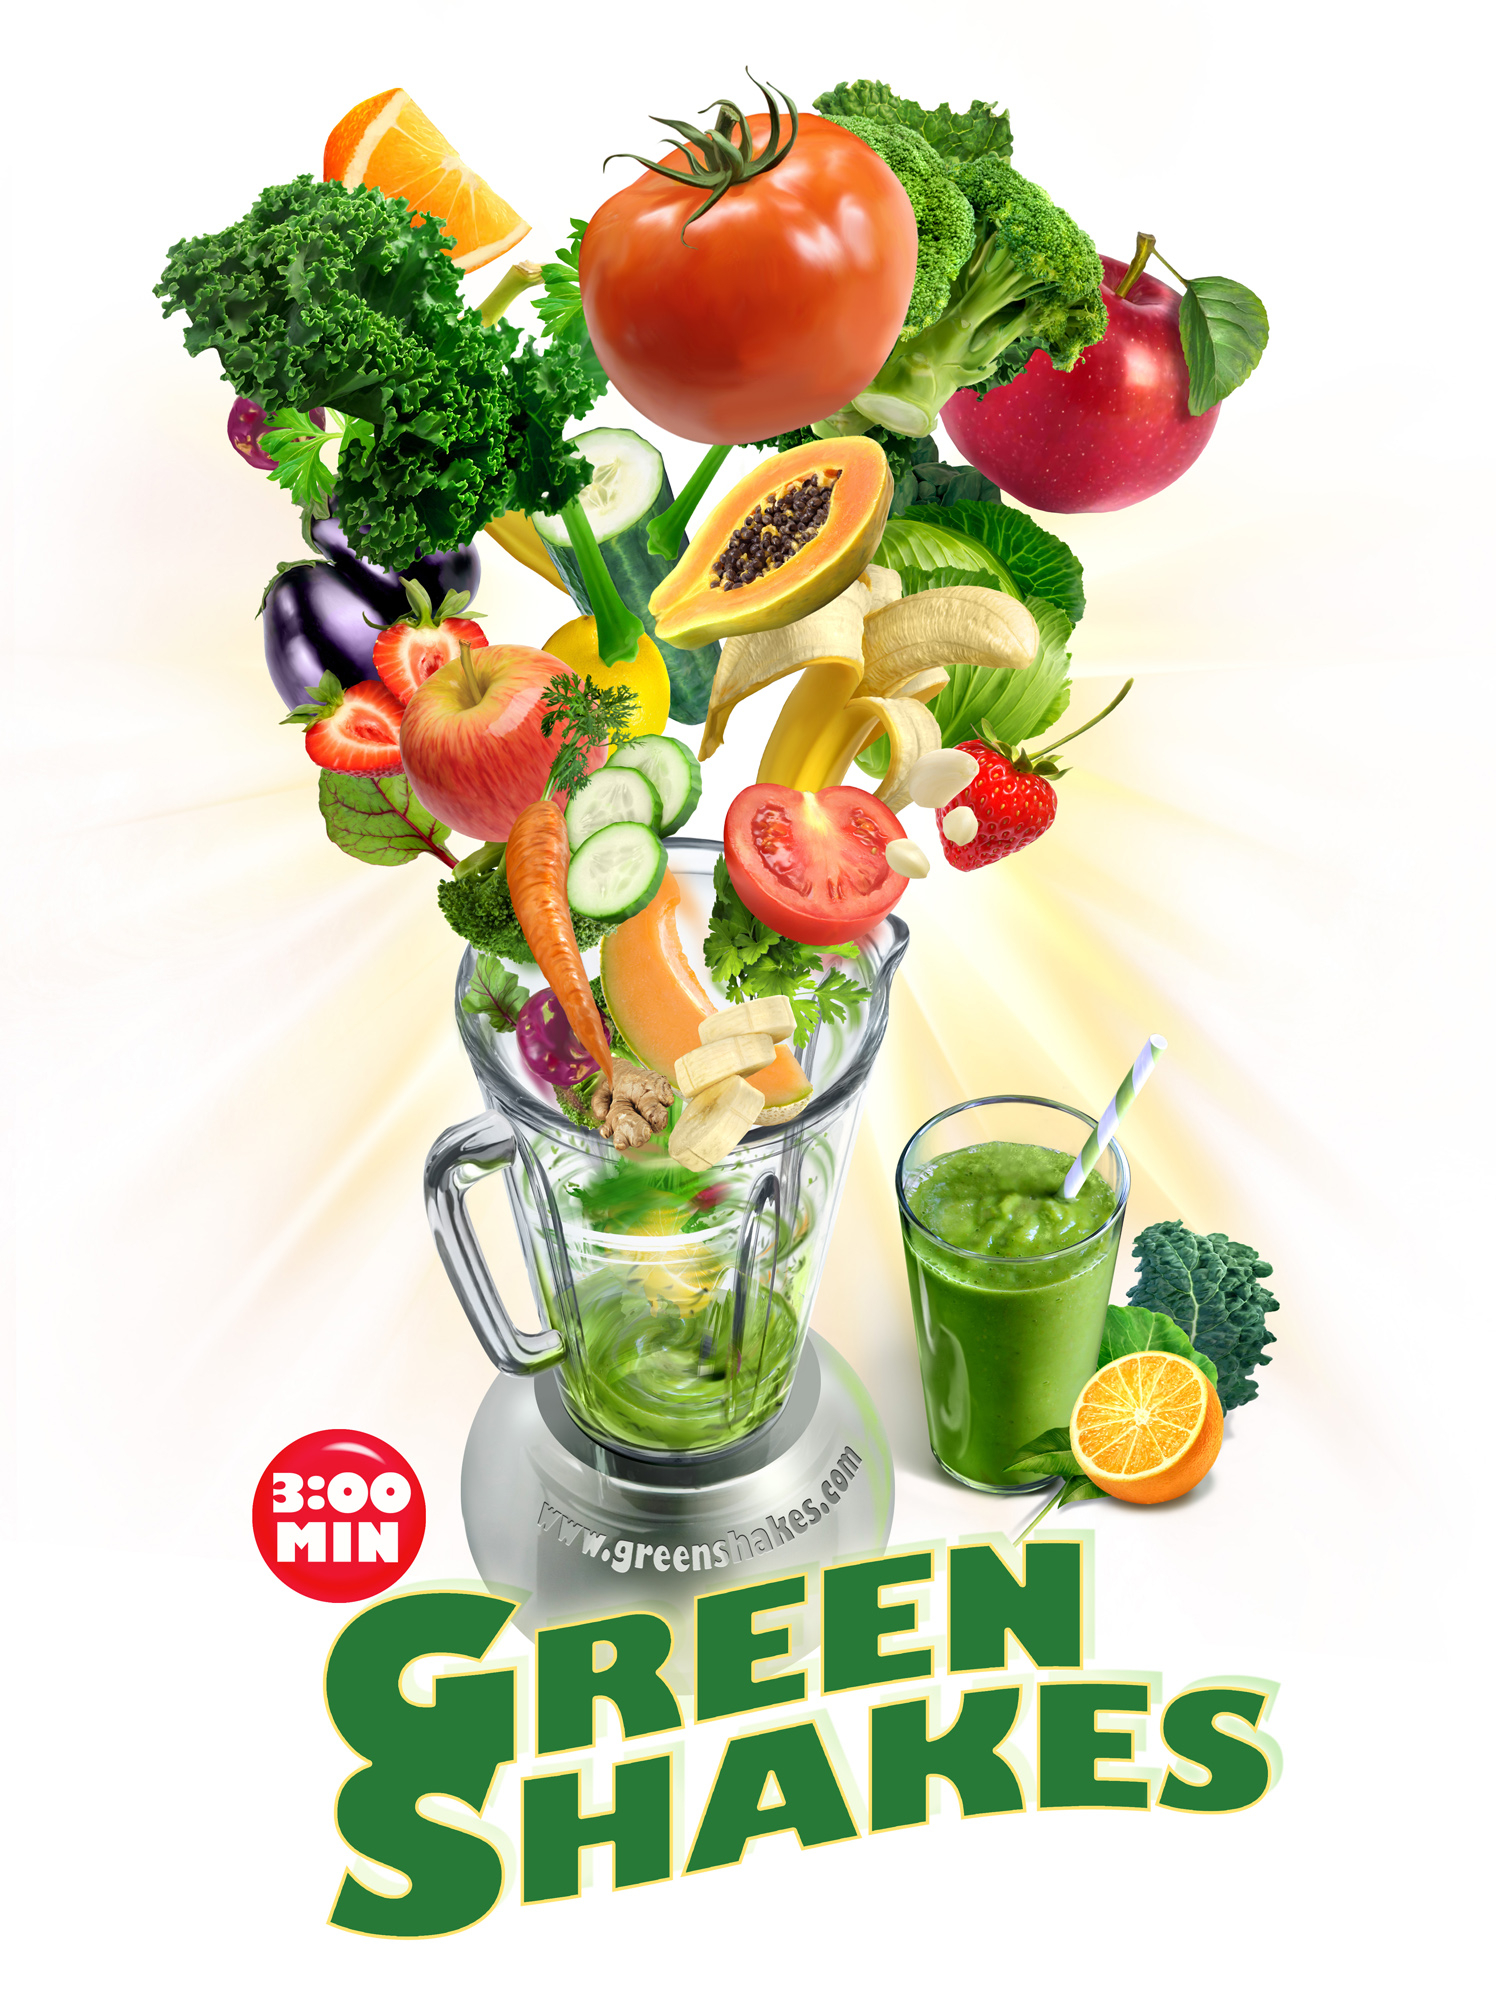 Green Shakes In 3 Minutes